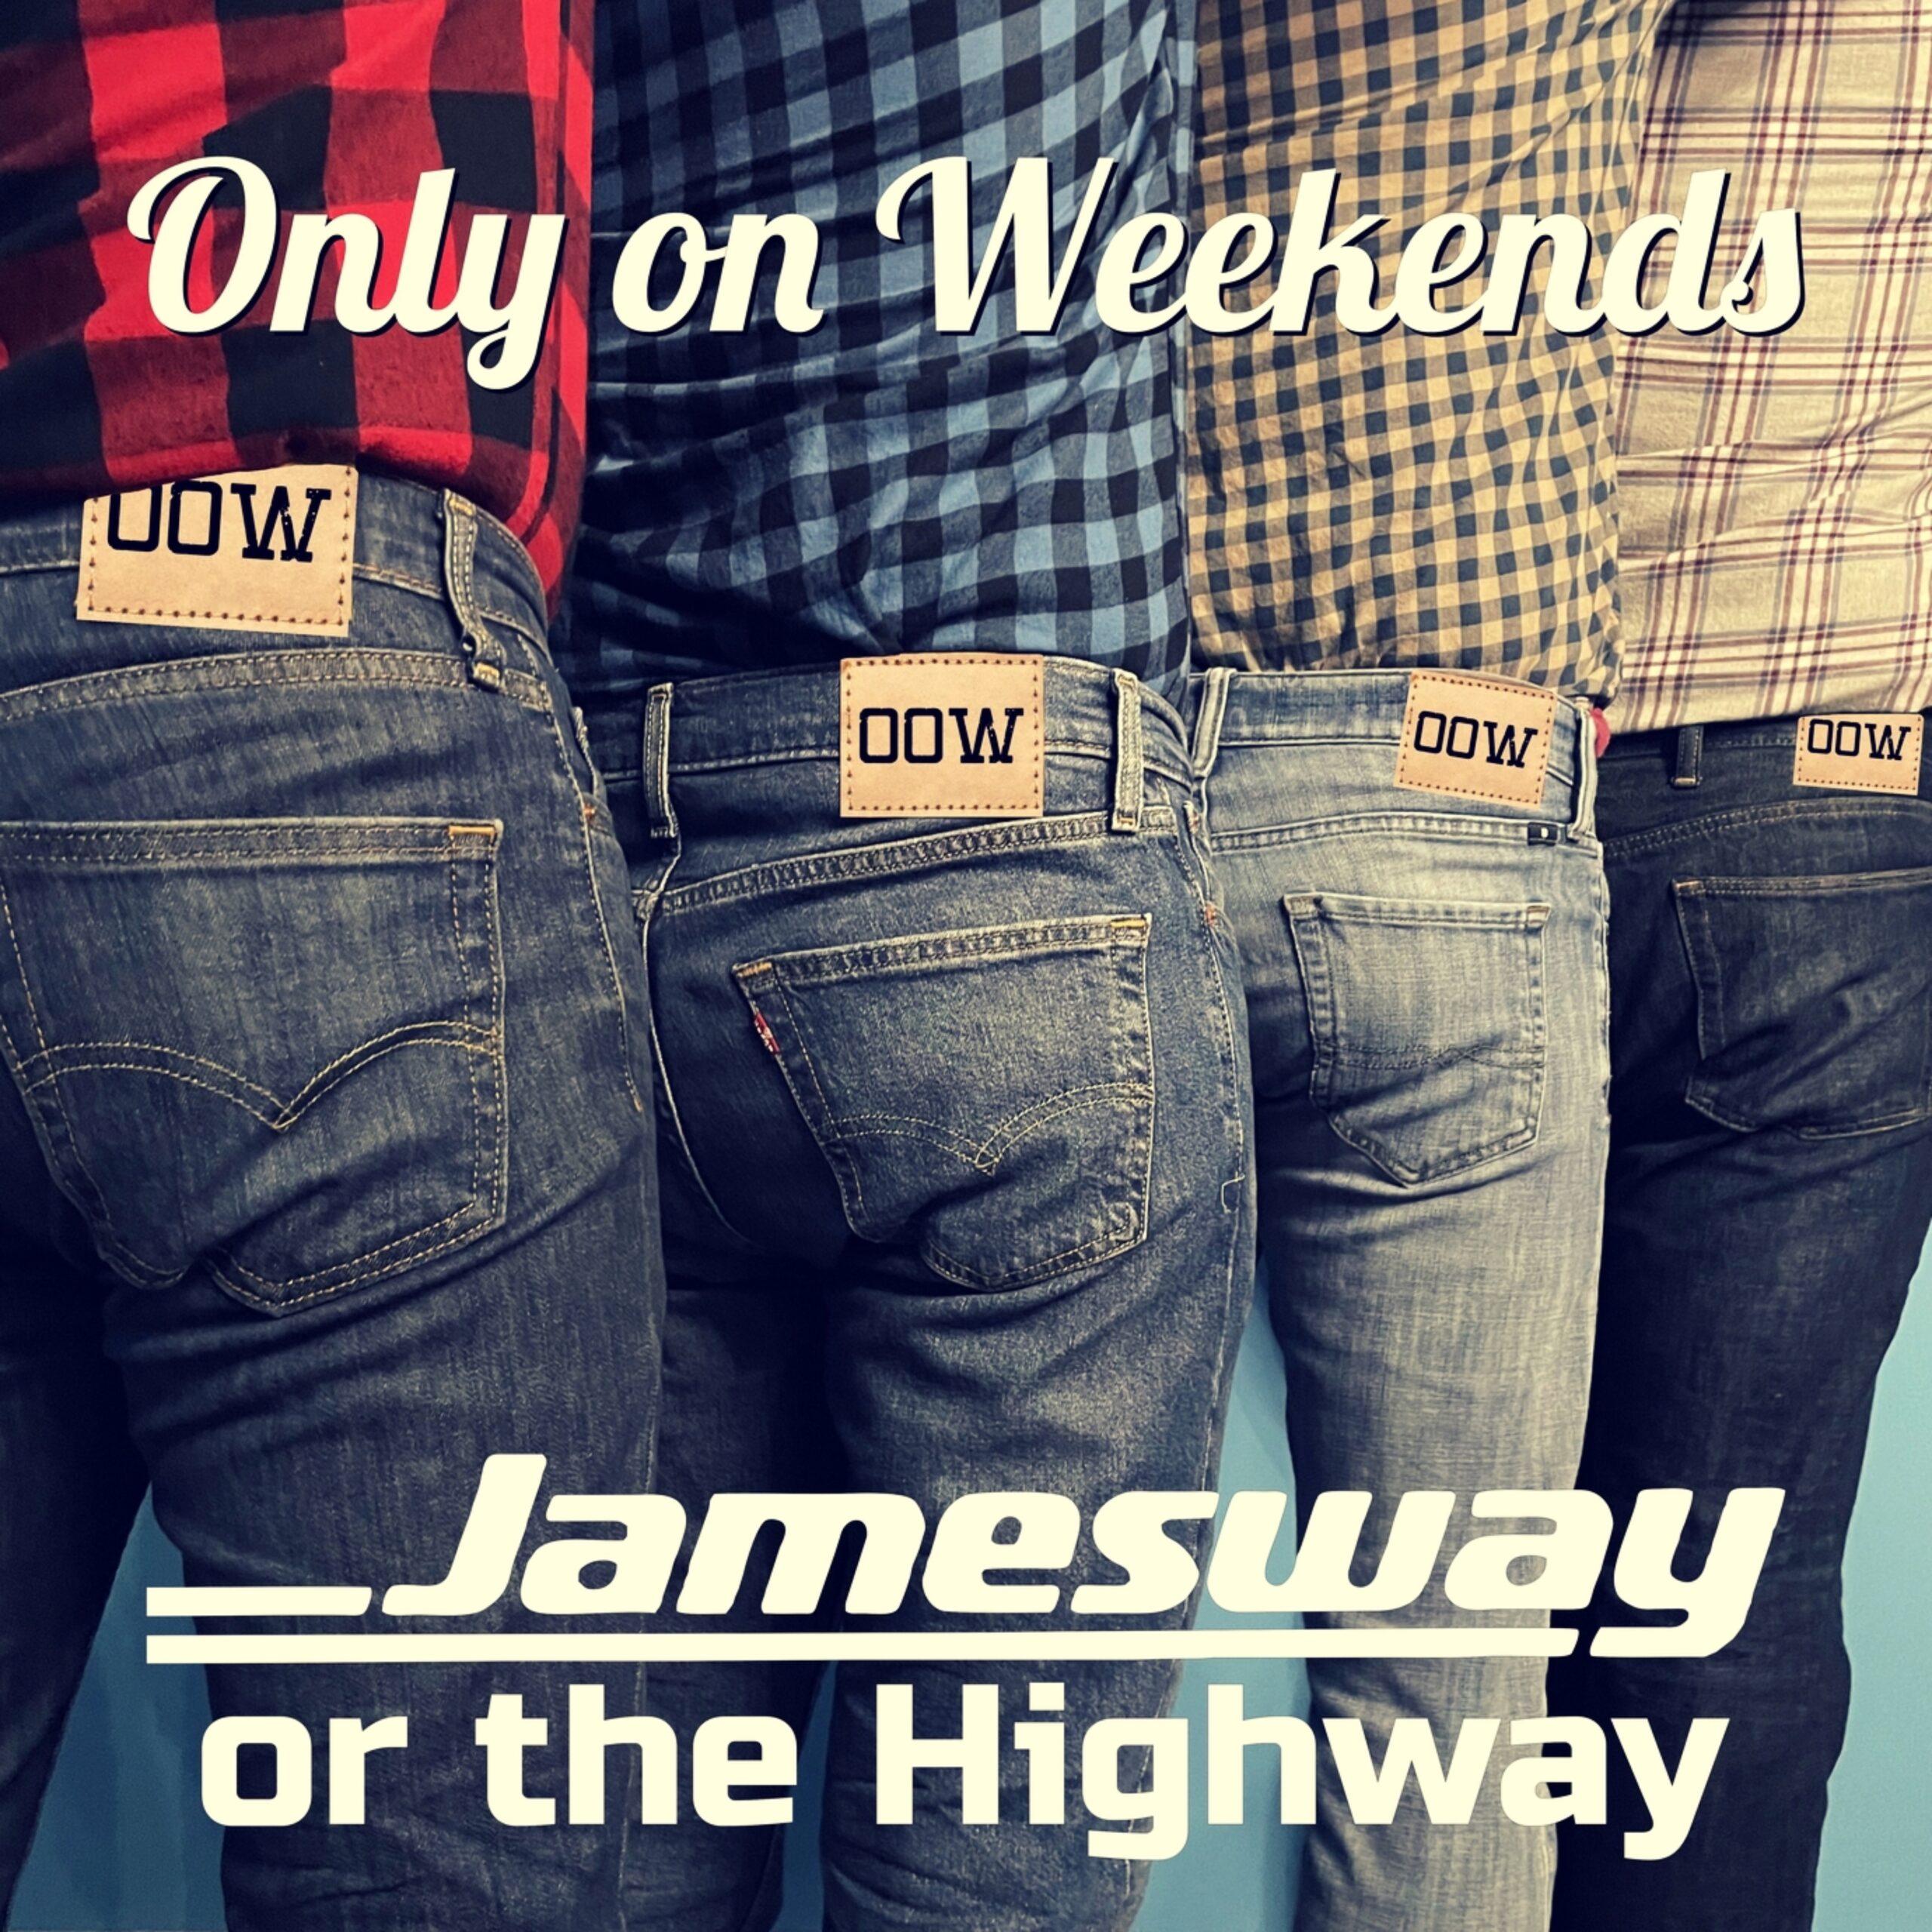 Only on Weekends - Jamesway or the Highway